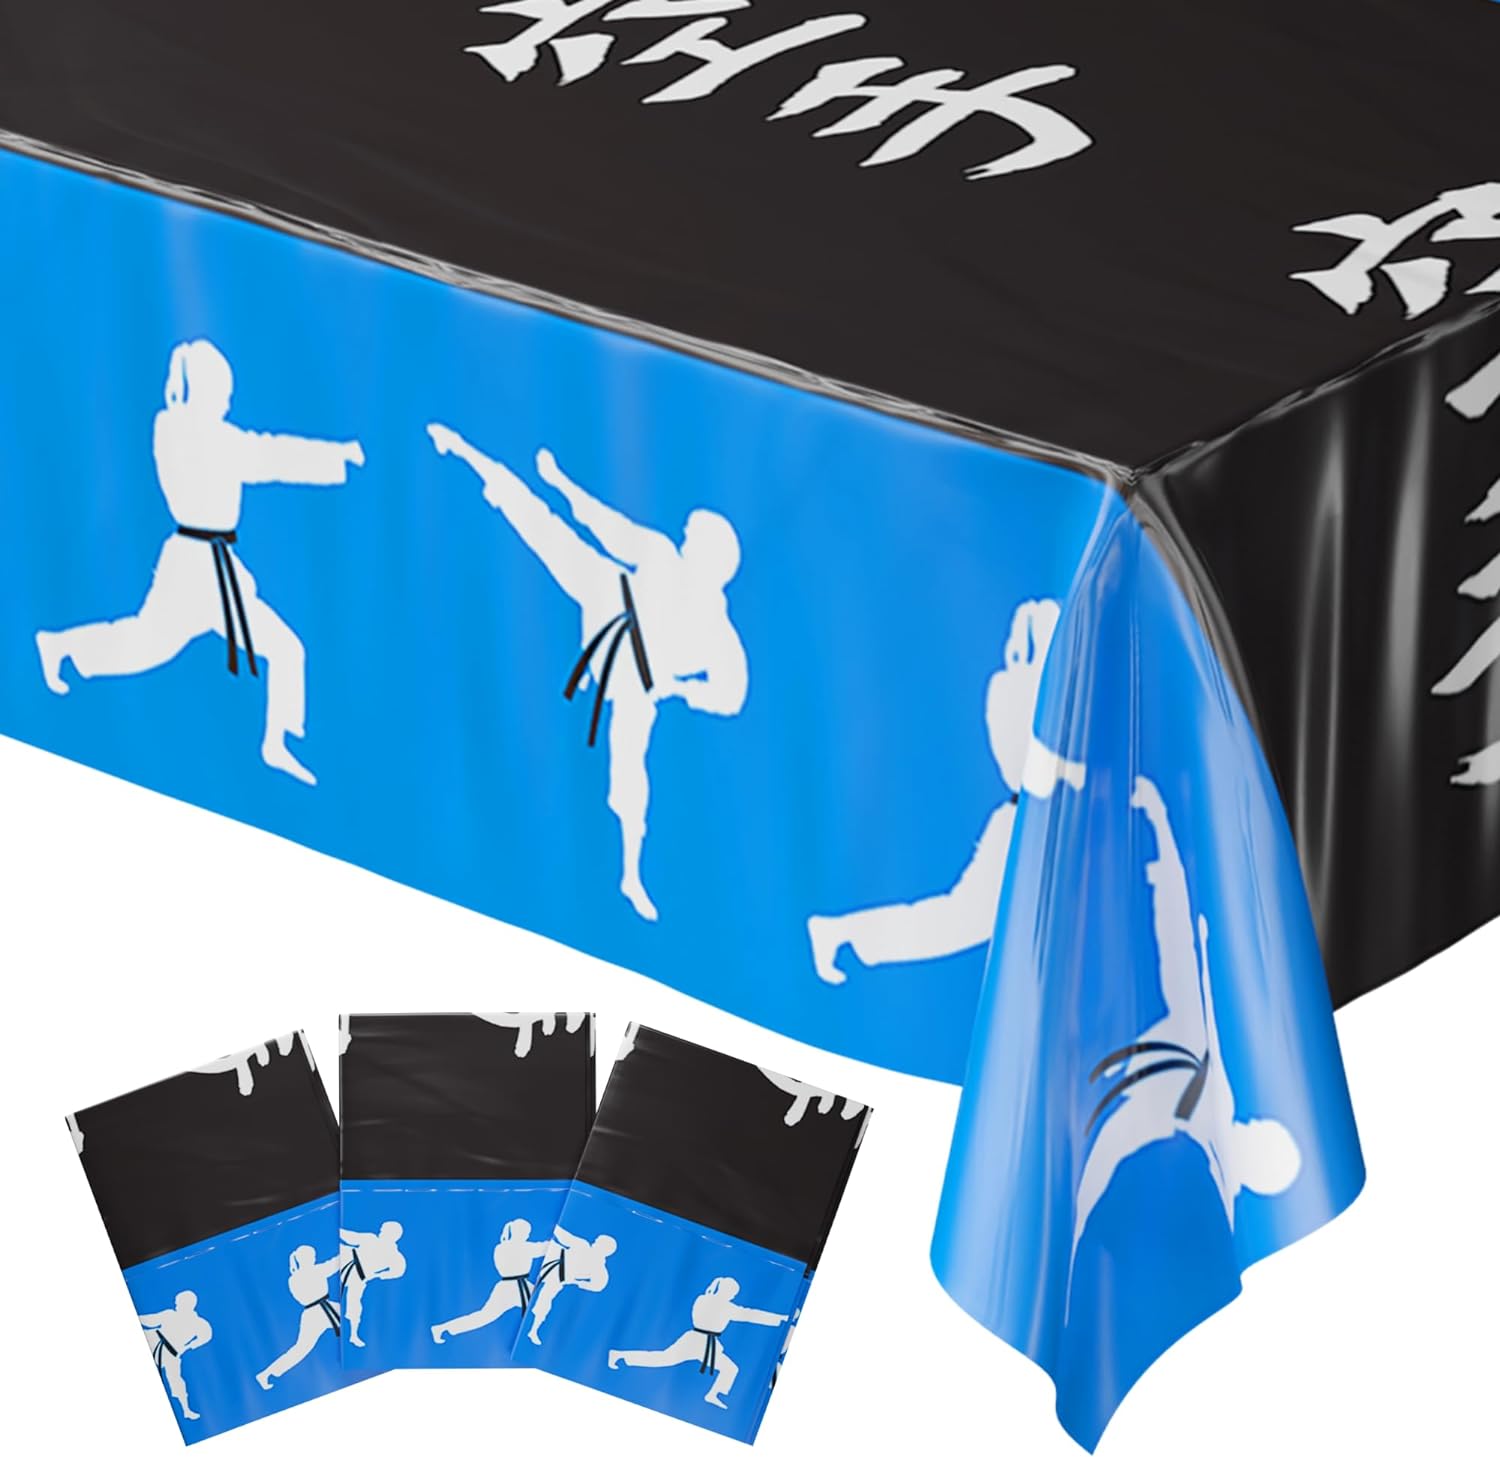 Karate Party Tablecovers - 54in x 108in (Pack of 3)